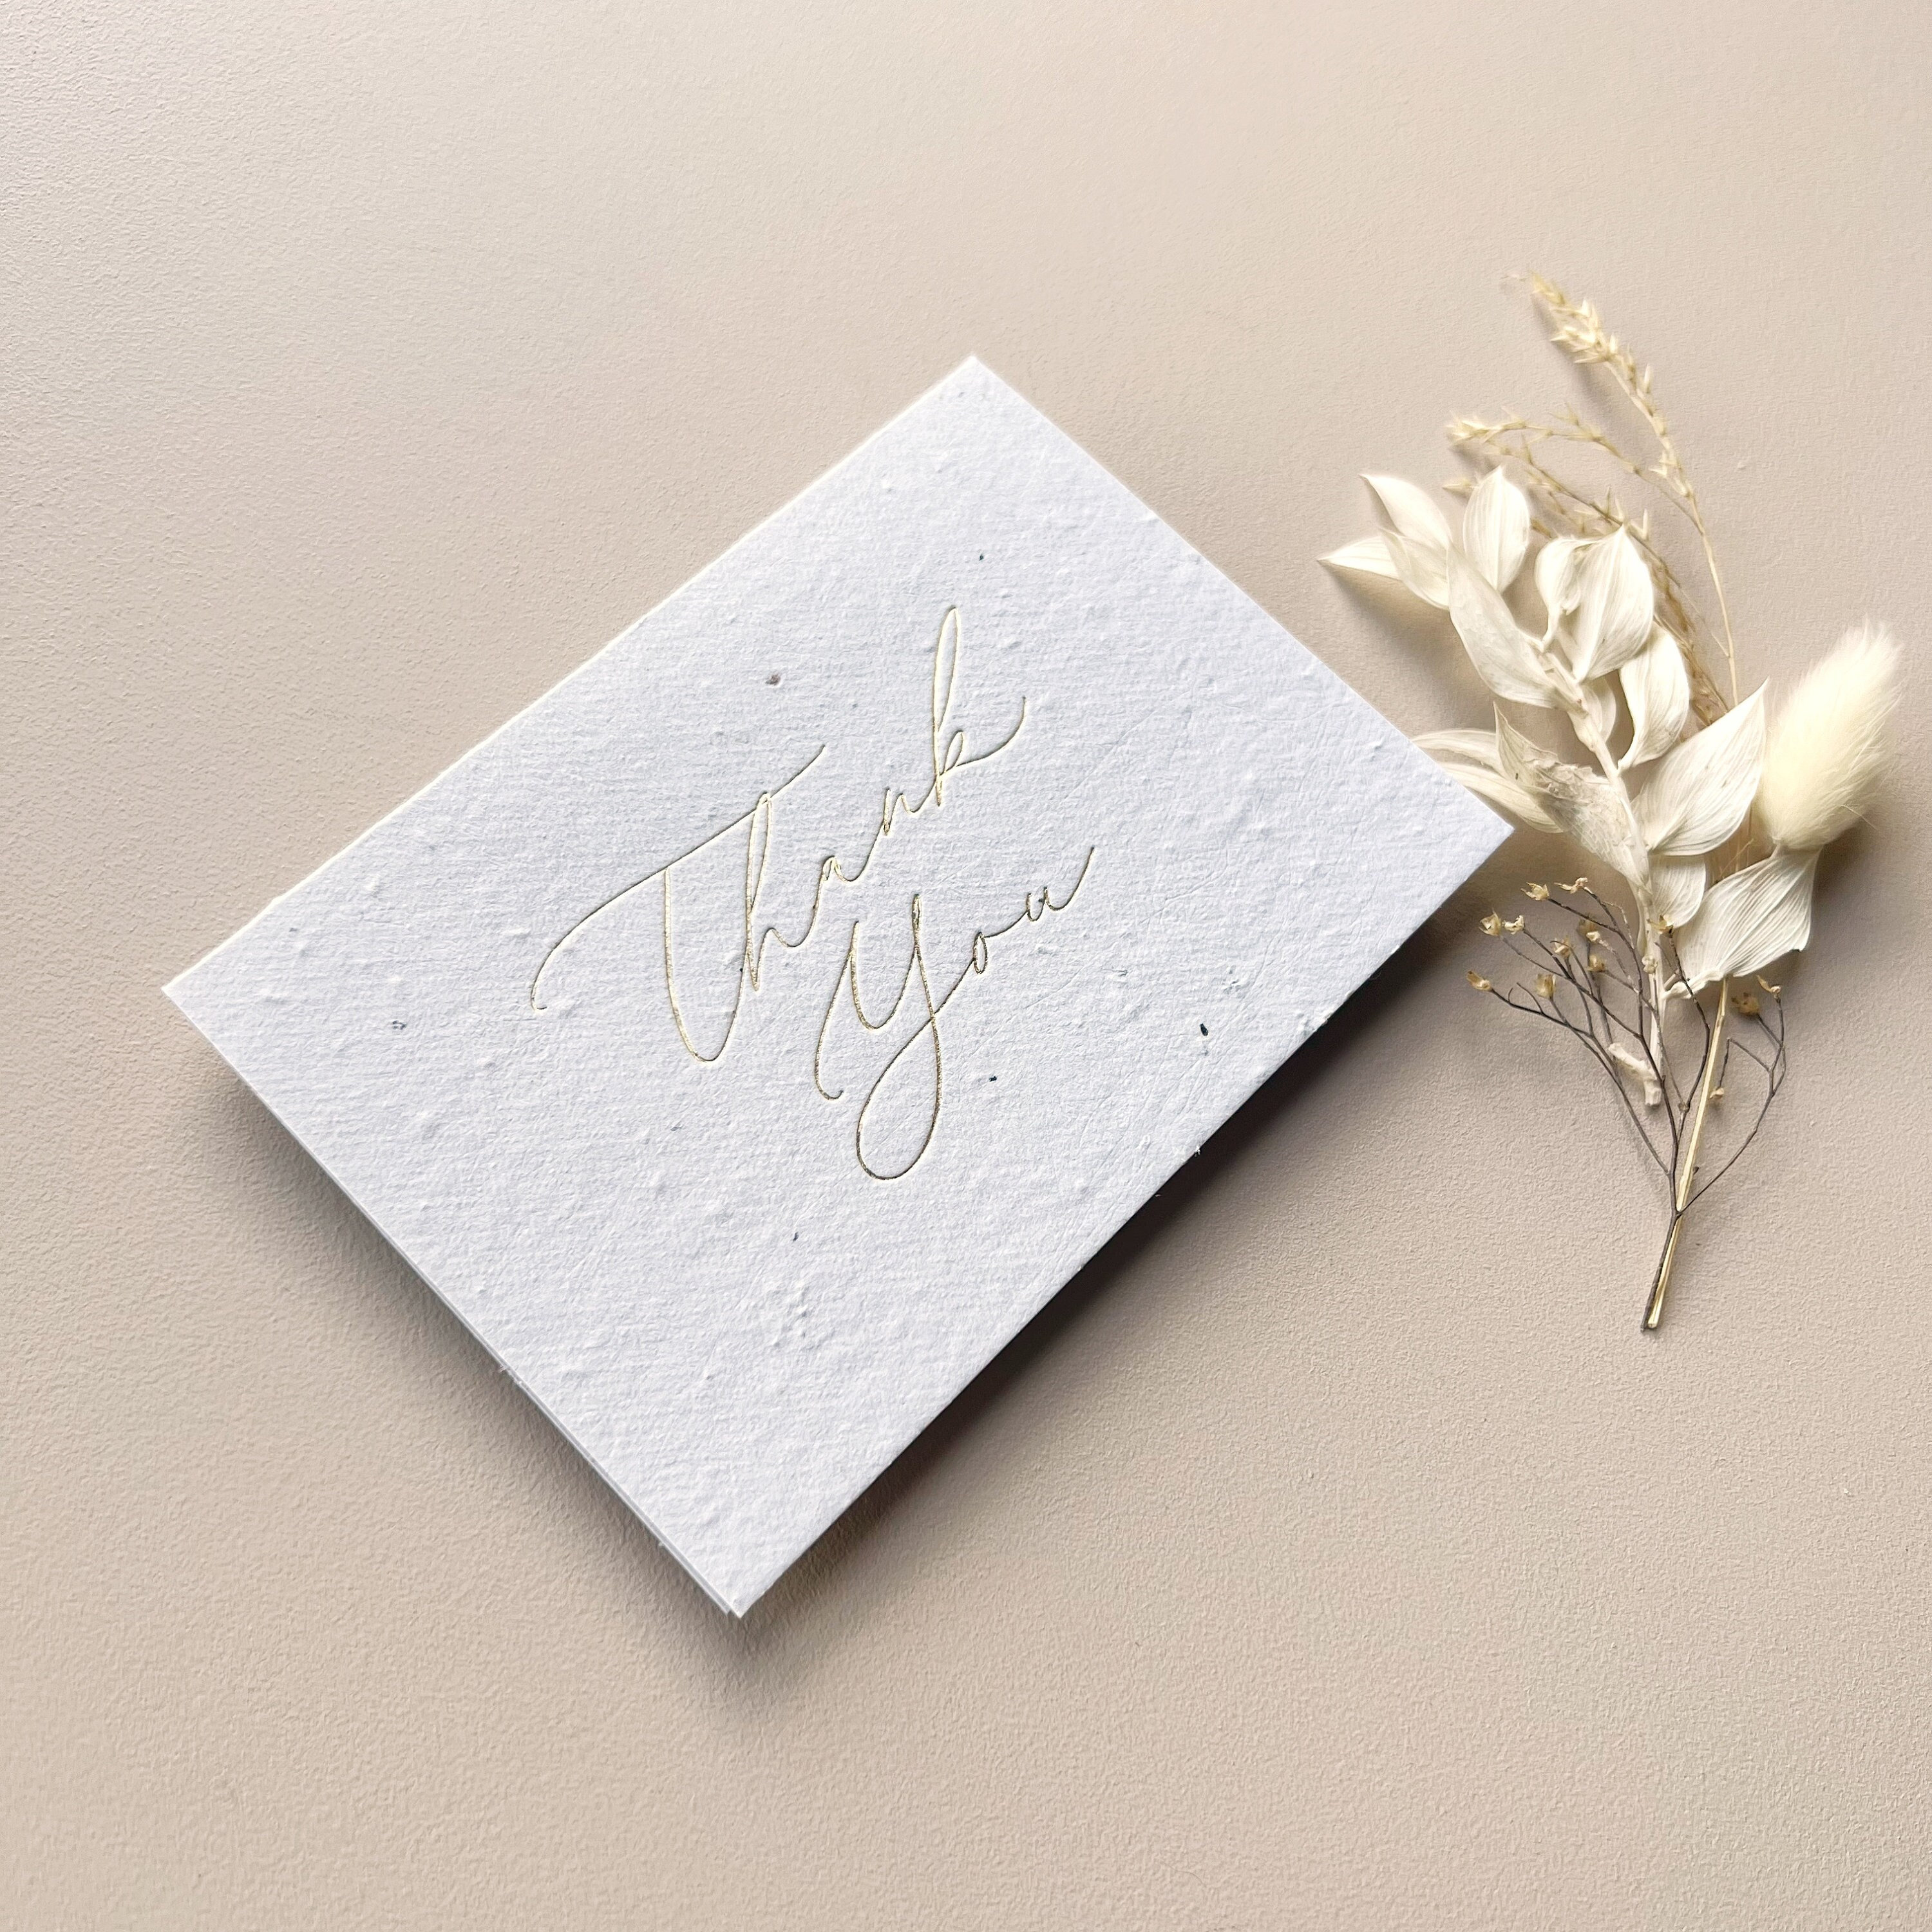 Gold Foil Letter S Personalized Blank Note Cards with Envelopes 4x6,  Initial S Monogrammed Stationery Set (Ivory, 24 Pack) in Dubai - UAE